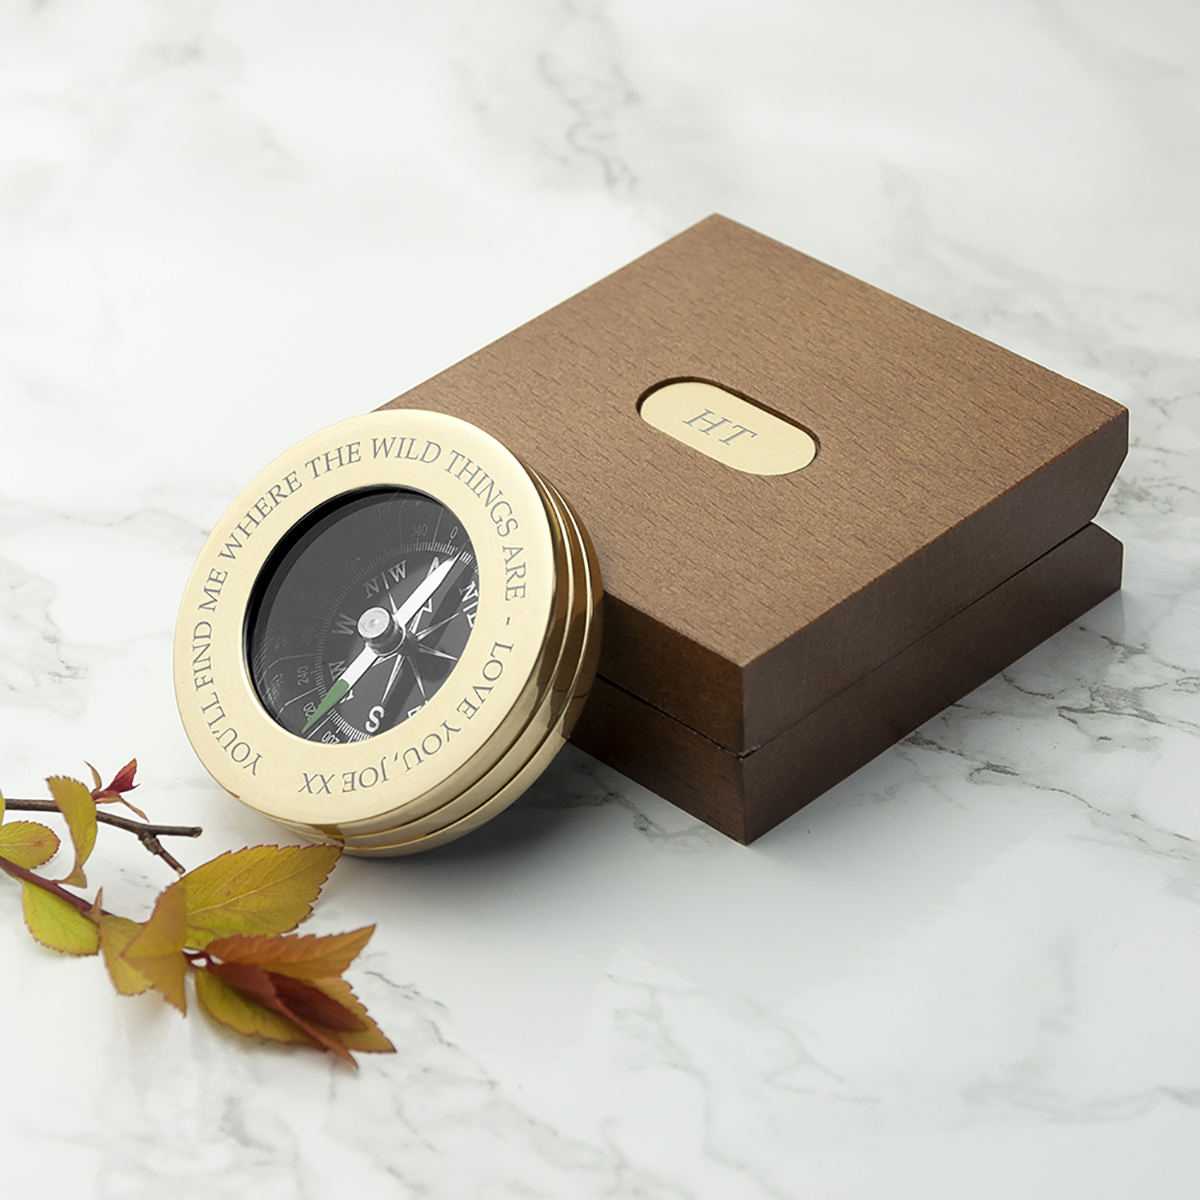 Personalised Brass Traveller's Compass With Personalised Wooden Box